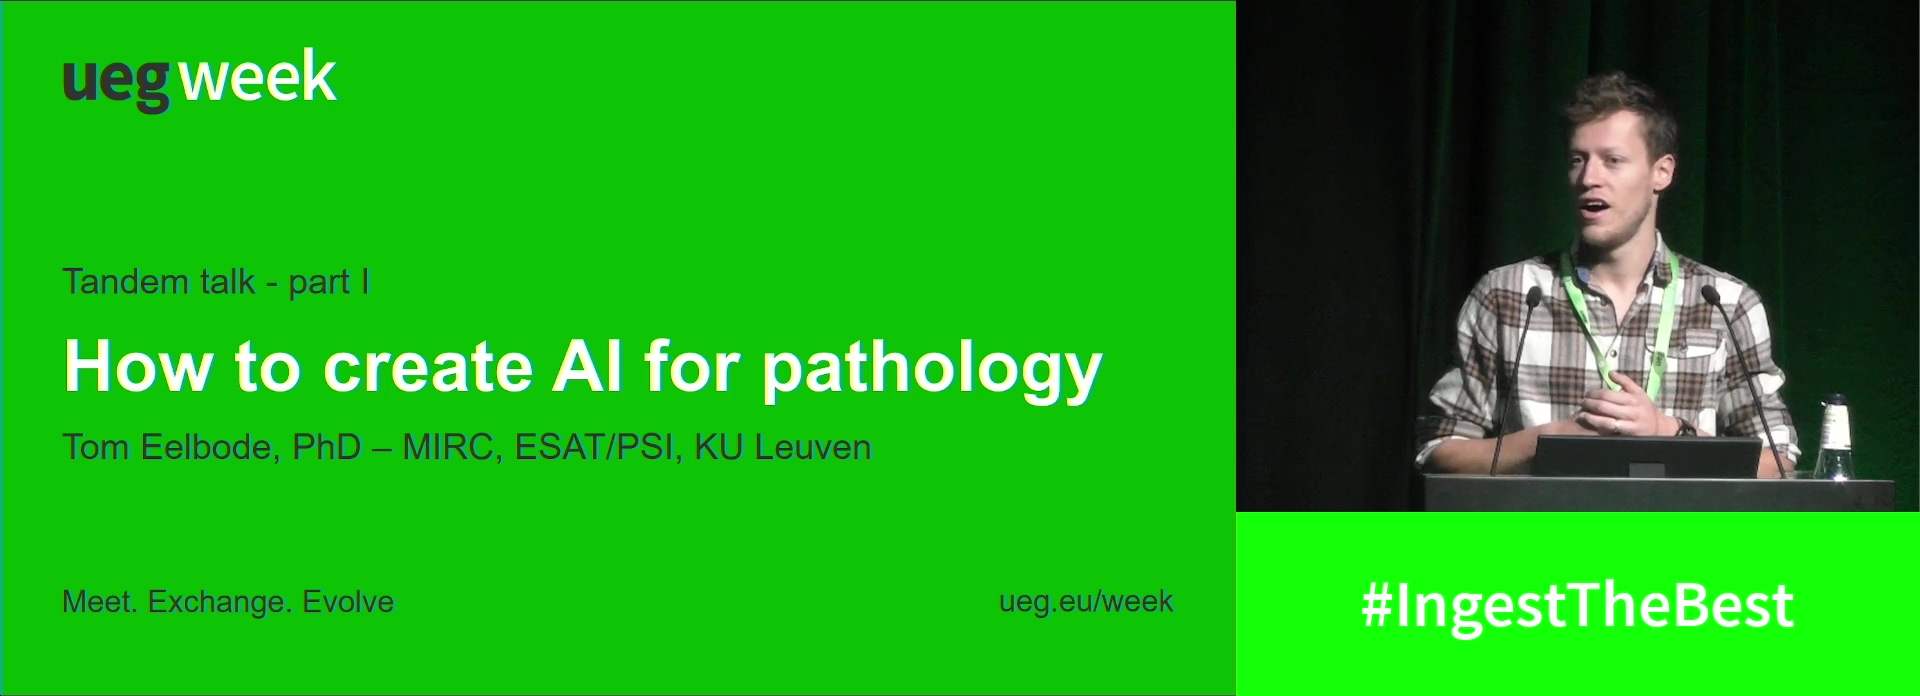 How to create AI for pathology and AI as new standard for pathology: Assisted or autonomous?